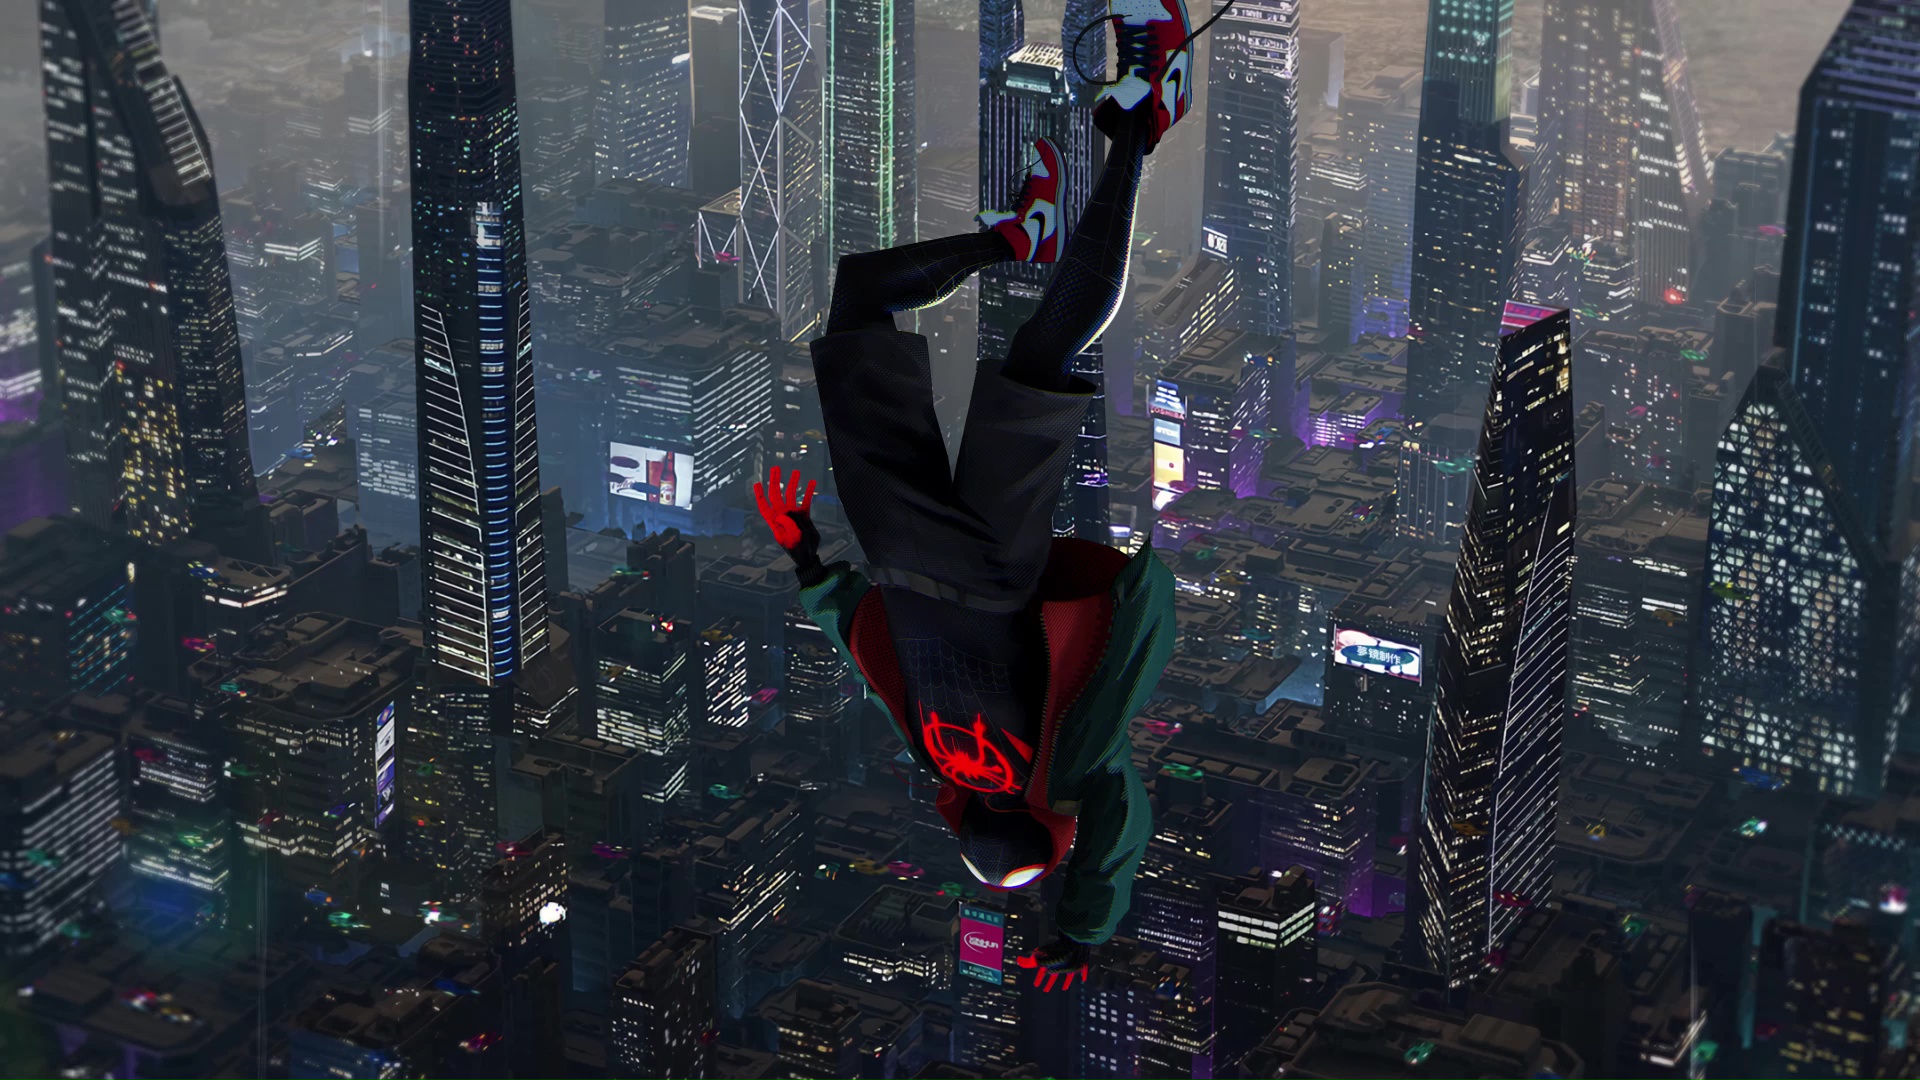 Into the spider verse iphone HD wallpapers  Pxfuel